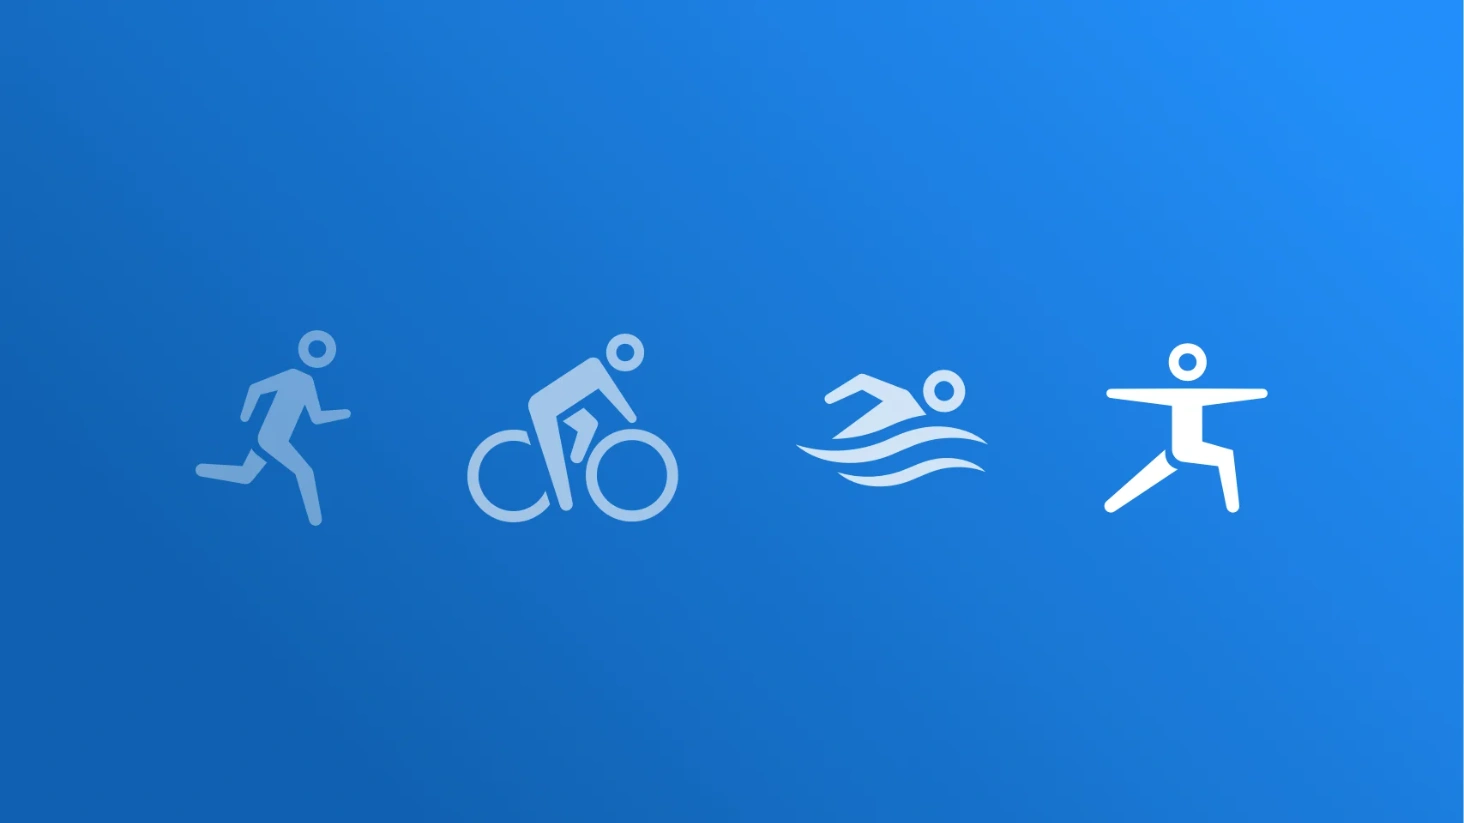 Icons for sports: running, cycling, swimming and gymnastics